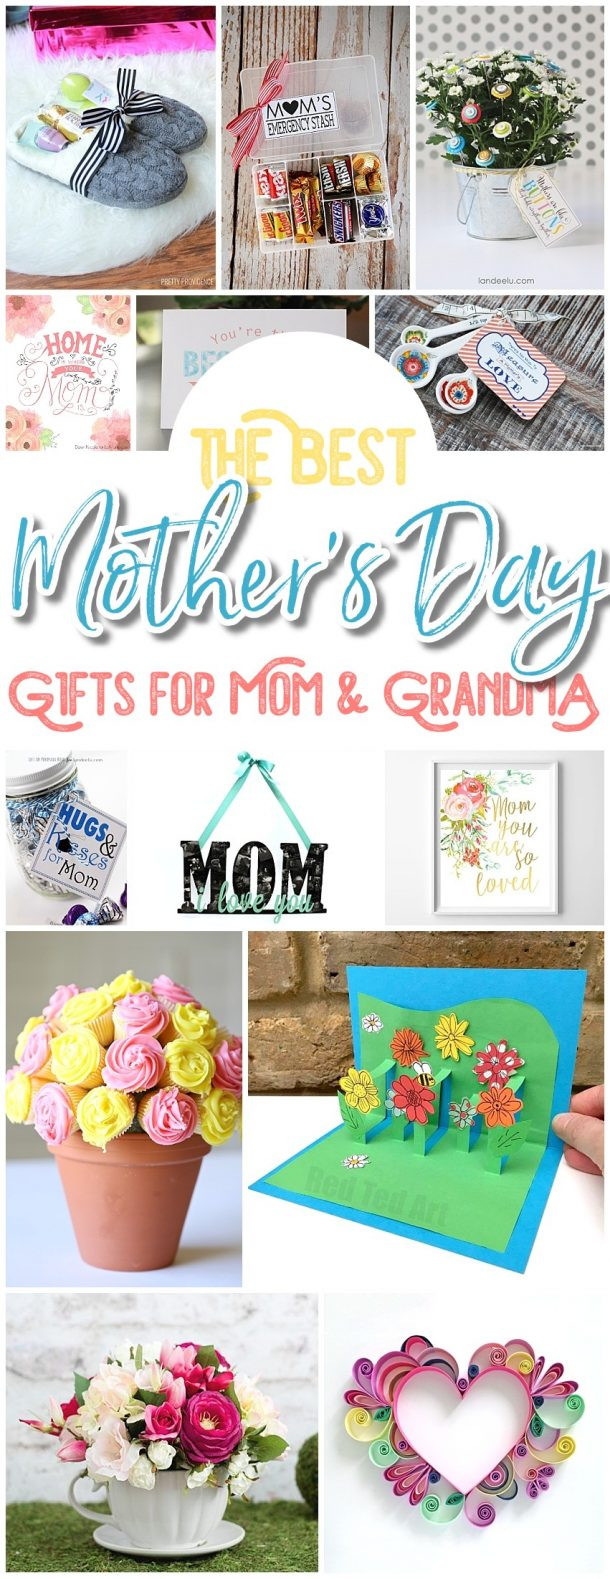 Mother's Day Ideas Diy
 The BEST Easy DIY Mother’s Day Gifts and Treats Ideas